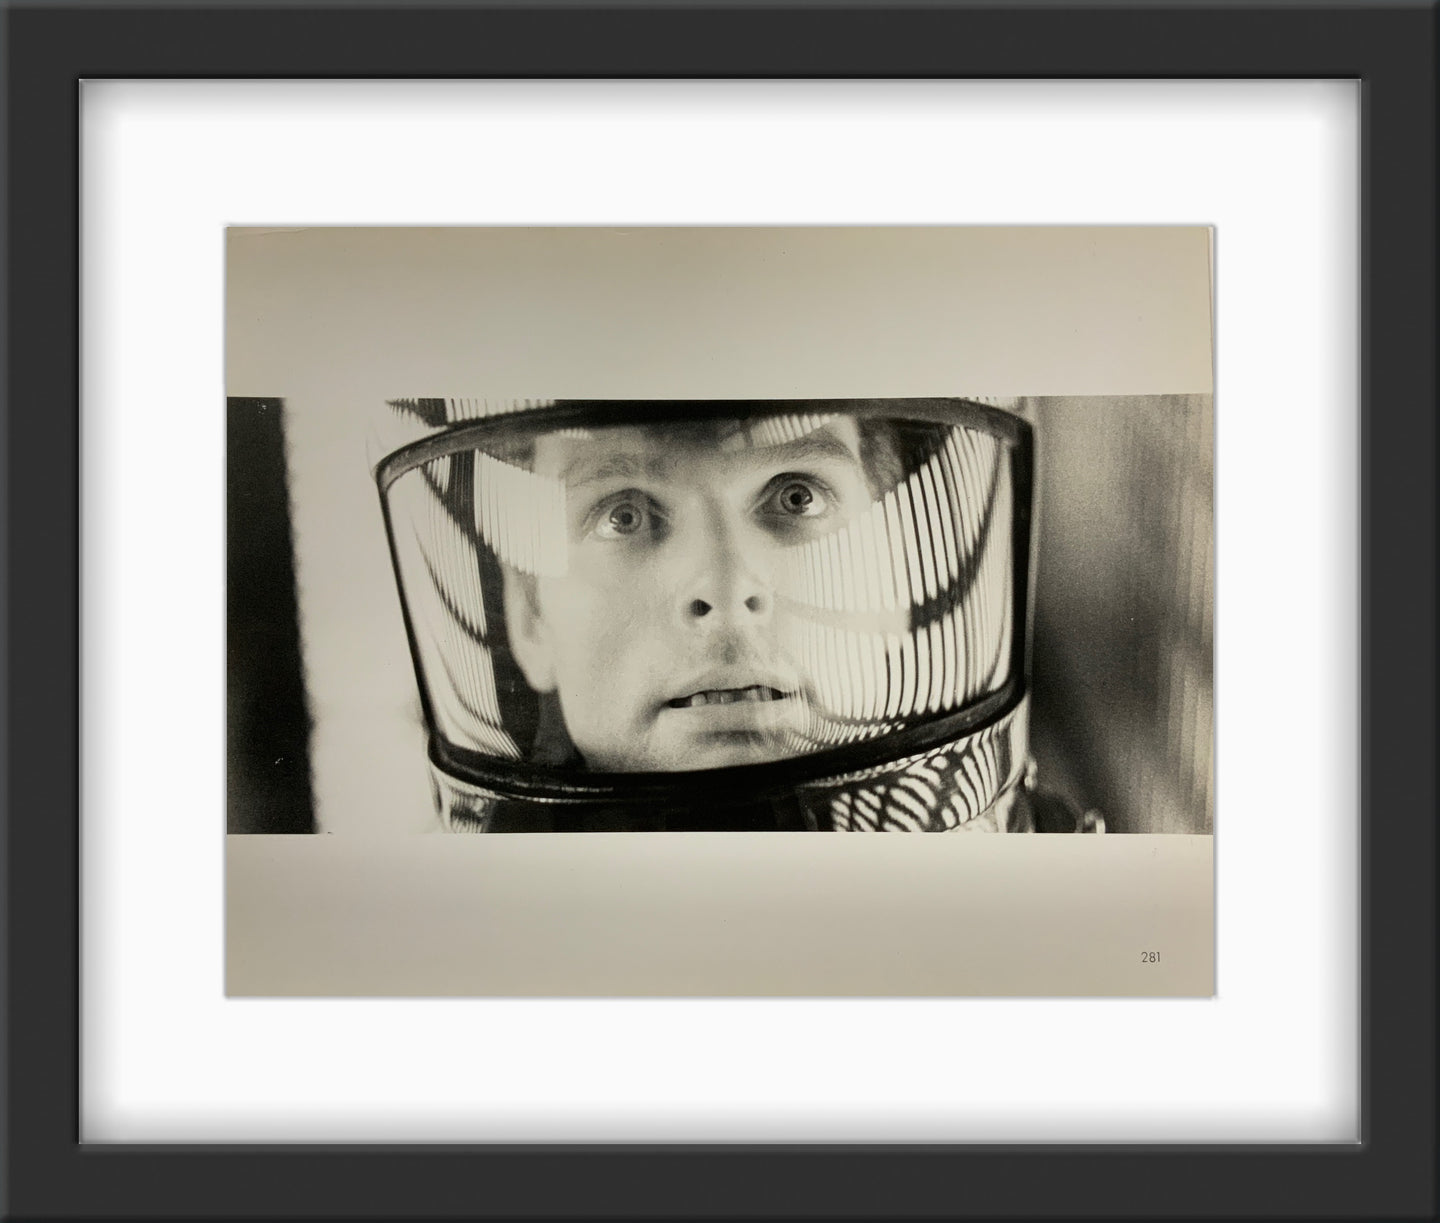 An original 8x10 movie still from the Stanley Kubrick film 2001: A Space Odyssey